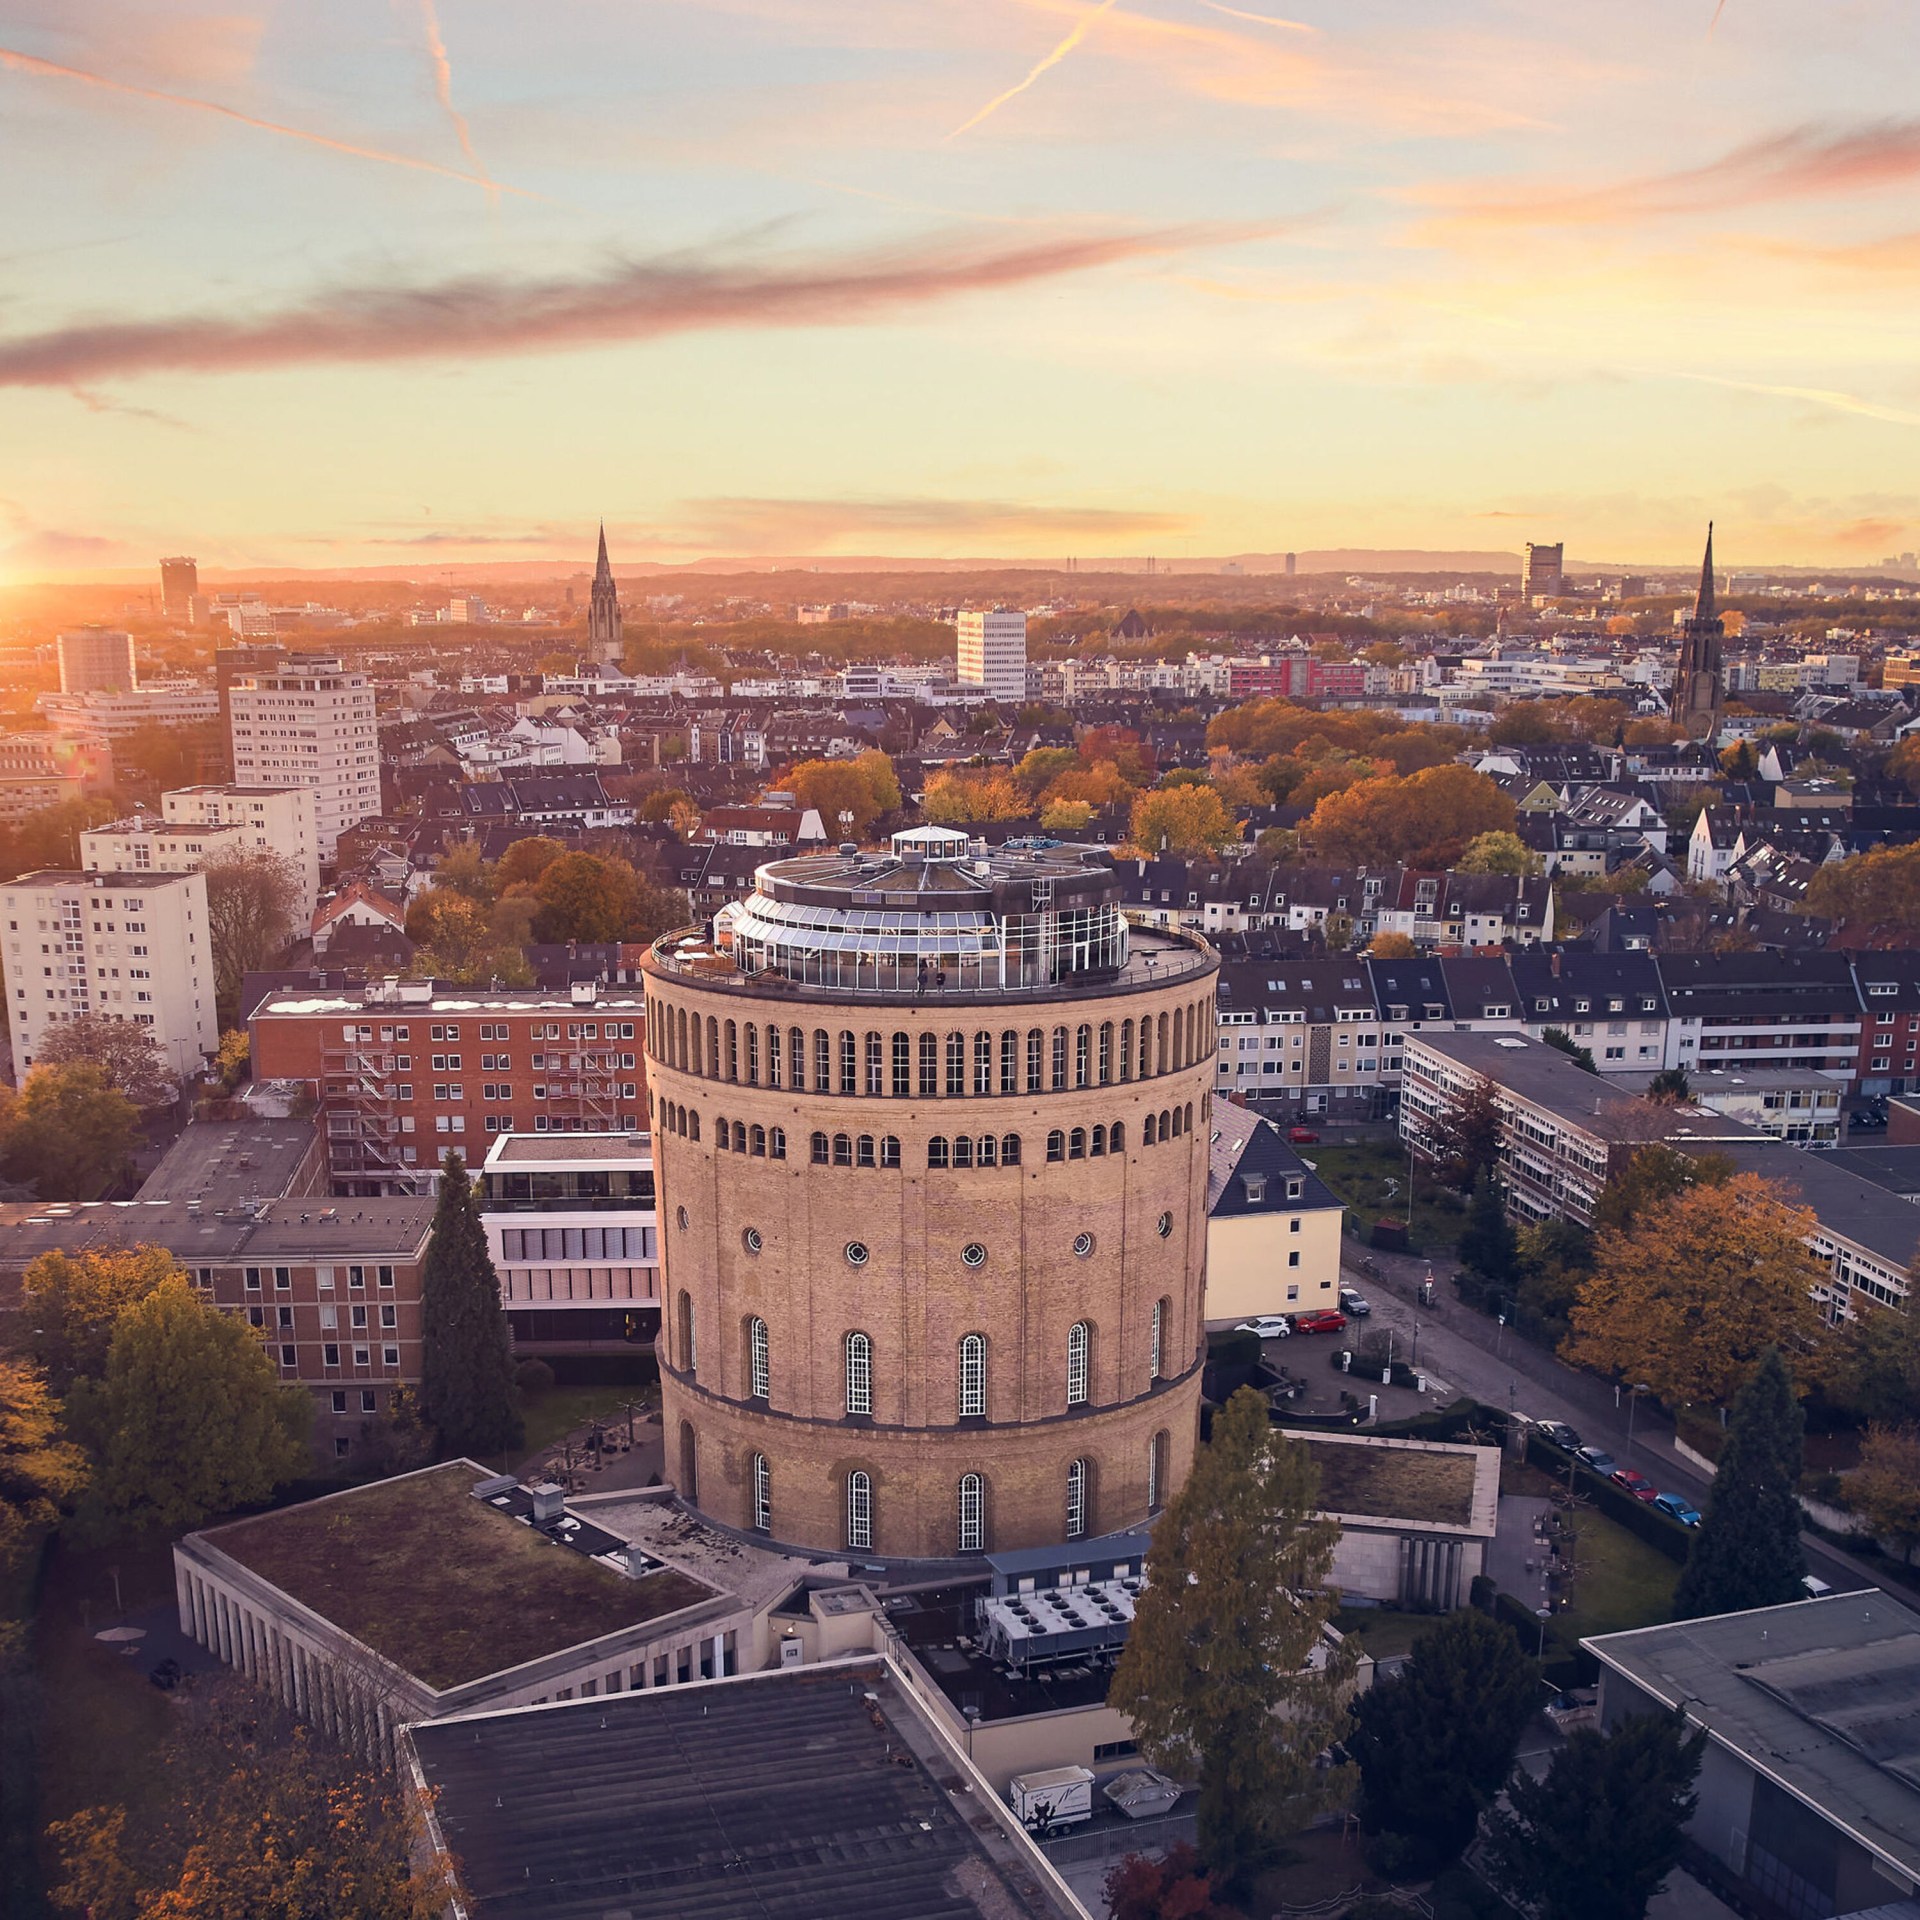 Wasserturm Hotel Cologne, Curio Collection by Hilton - Exterior Aerial